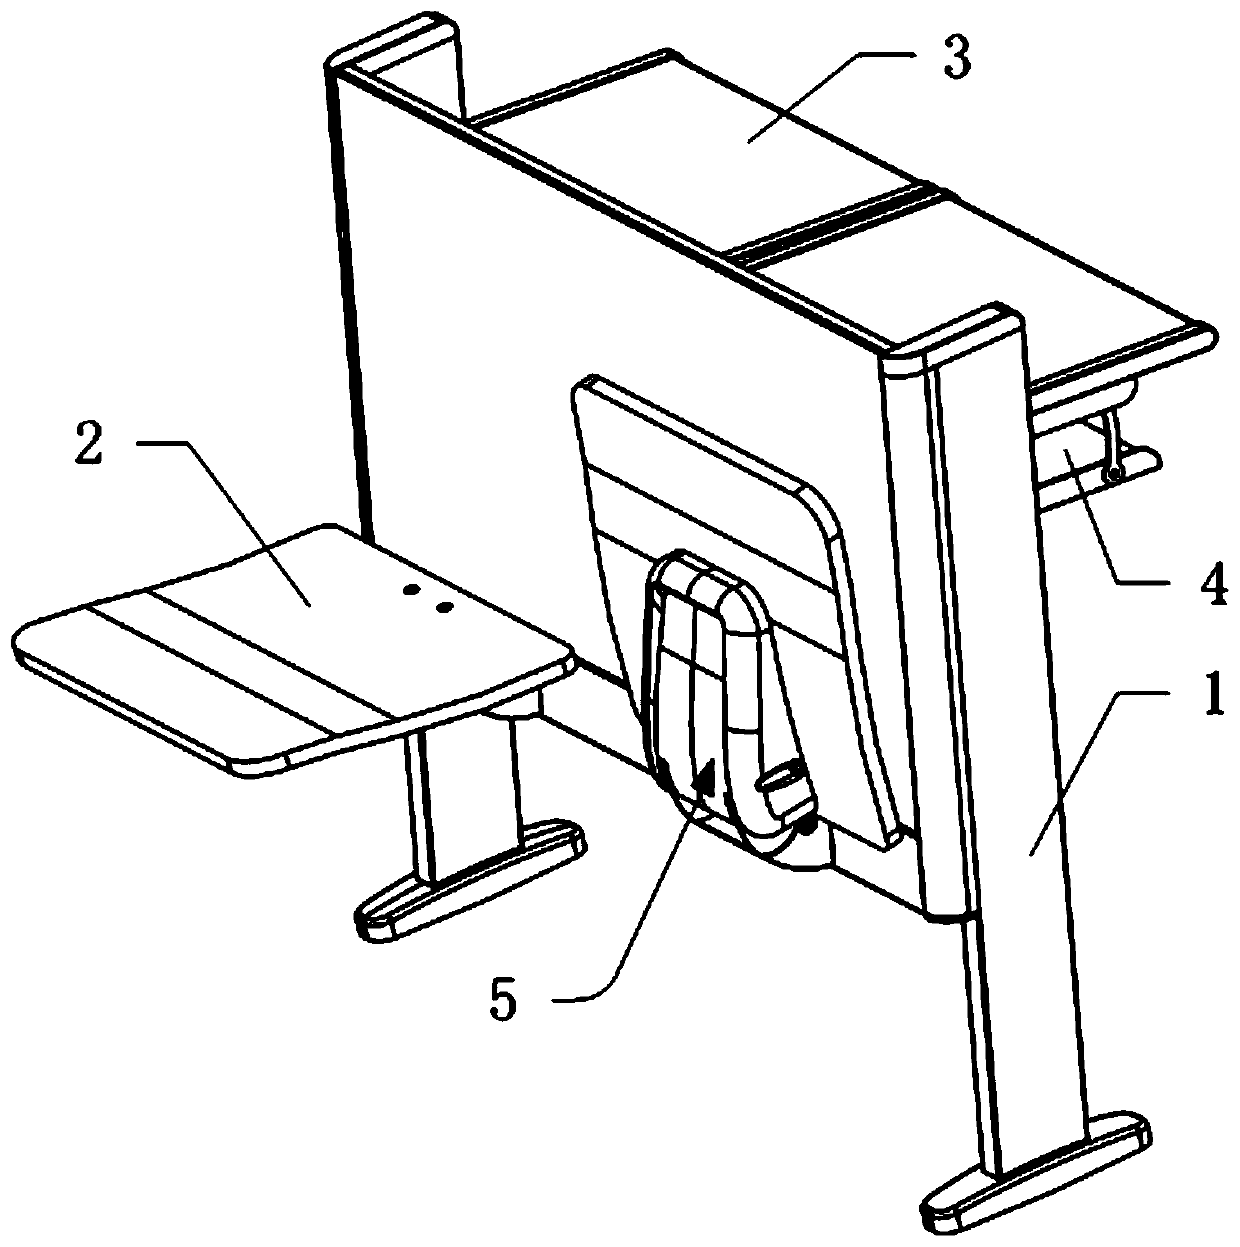 Integrated desk-chair structure